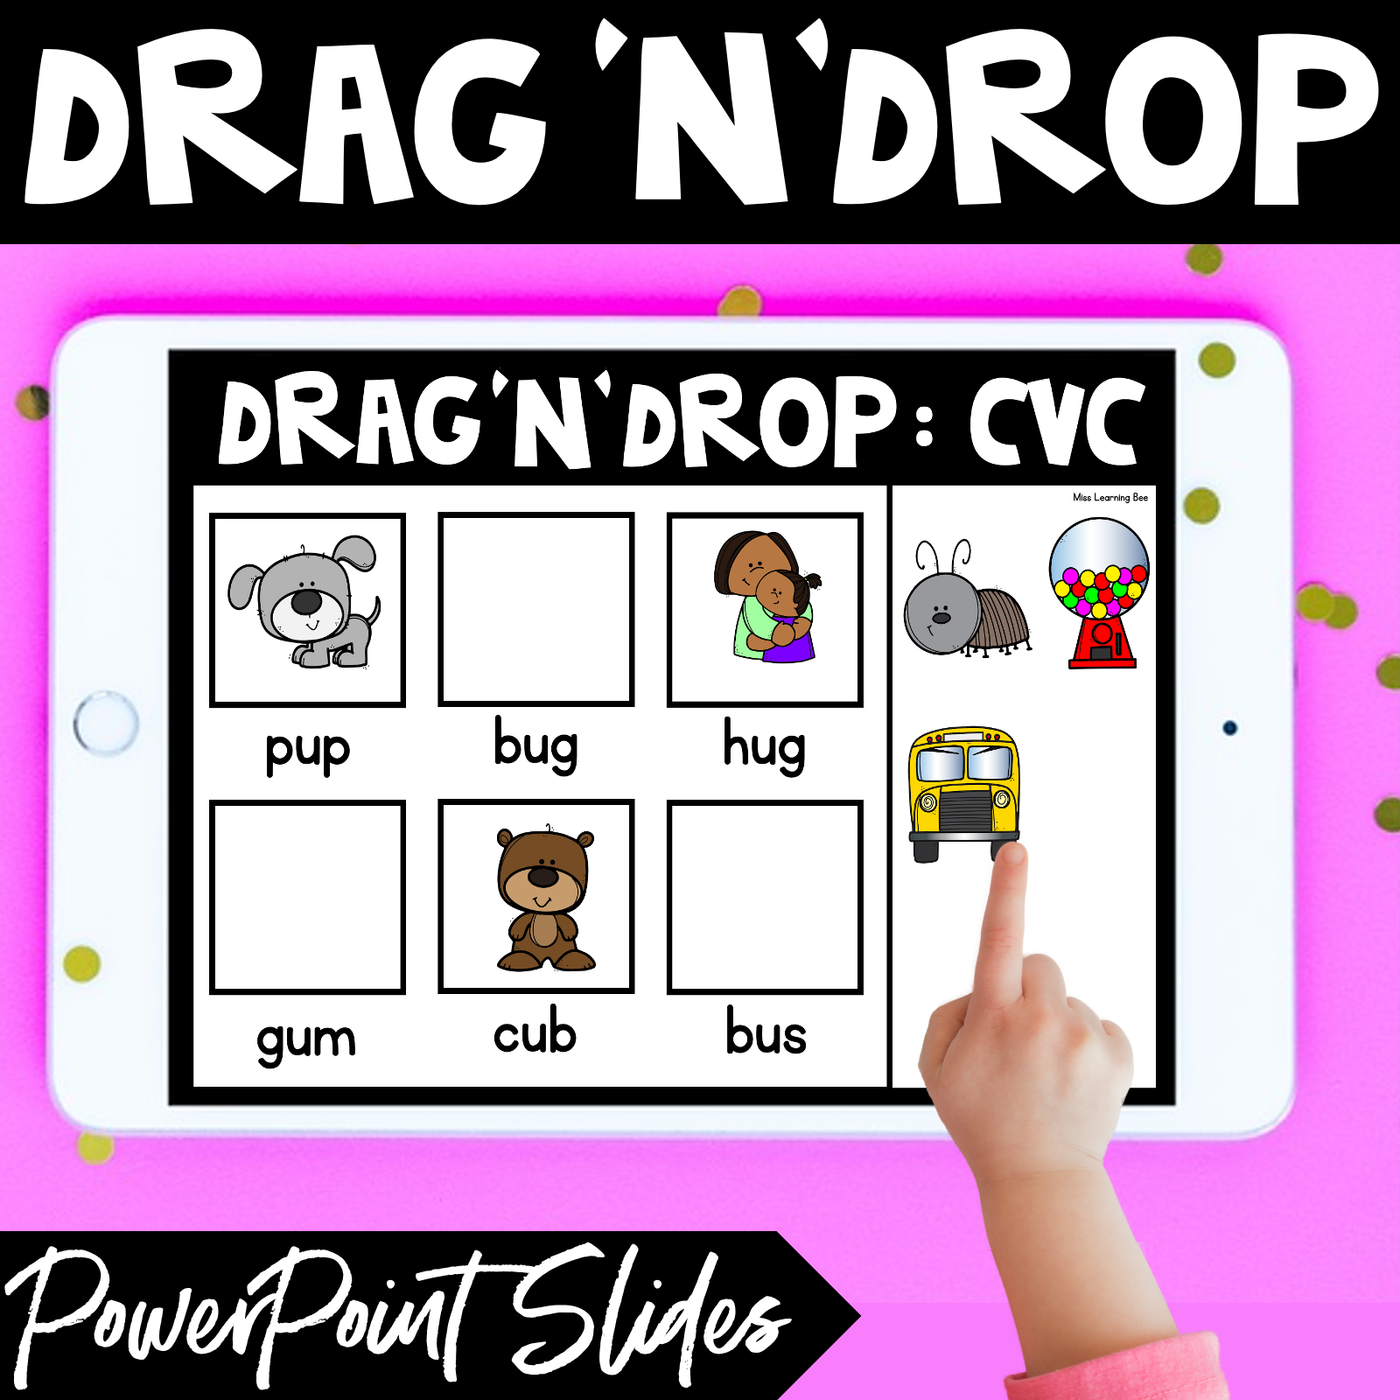 DRAG AND DROP THE CVC WORD | PowerPoint